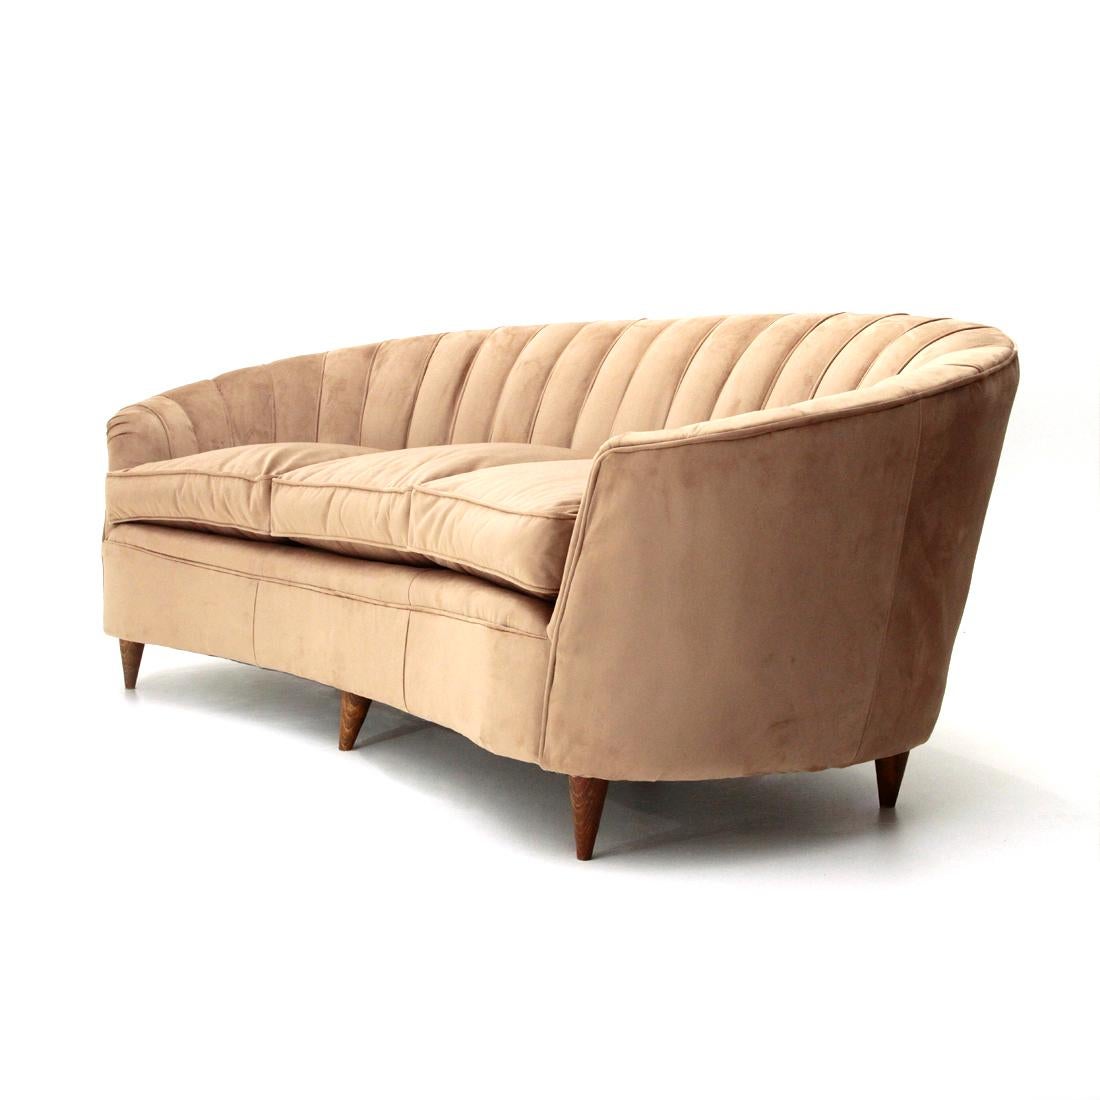 Italian Mid-Century Modern 3-Seat Powder Pink-Colored Curved Sofa, 1950s For Sale